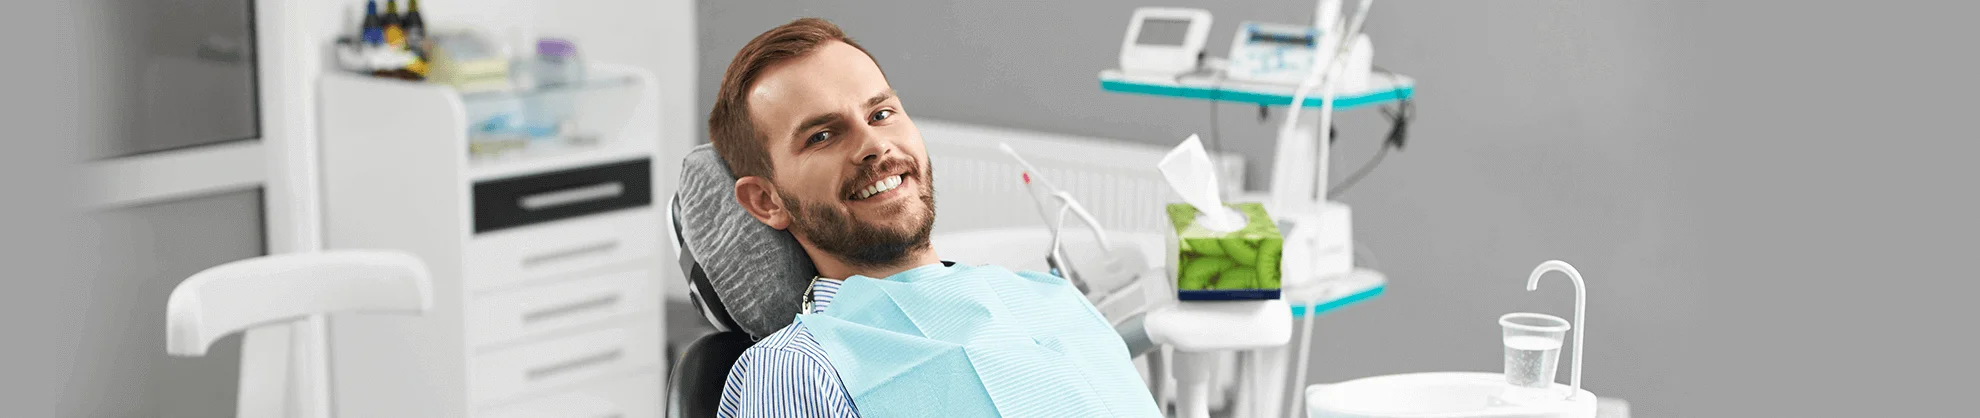 periodontal services background